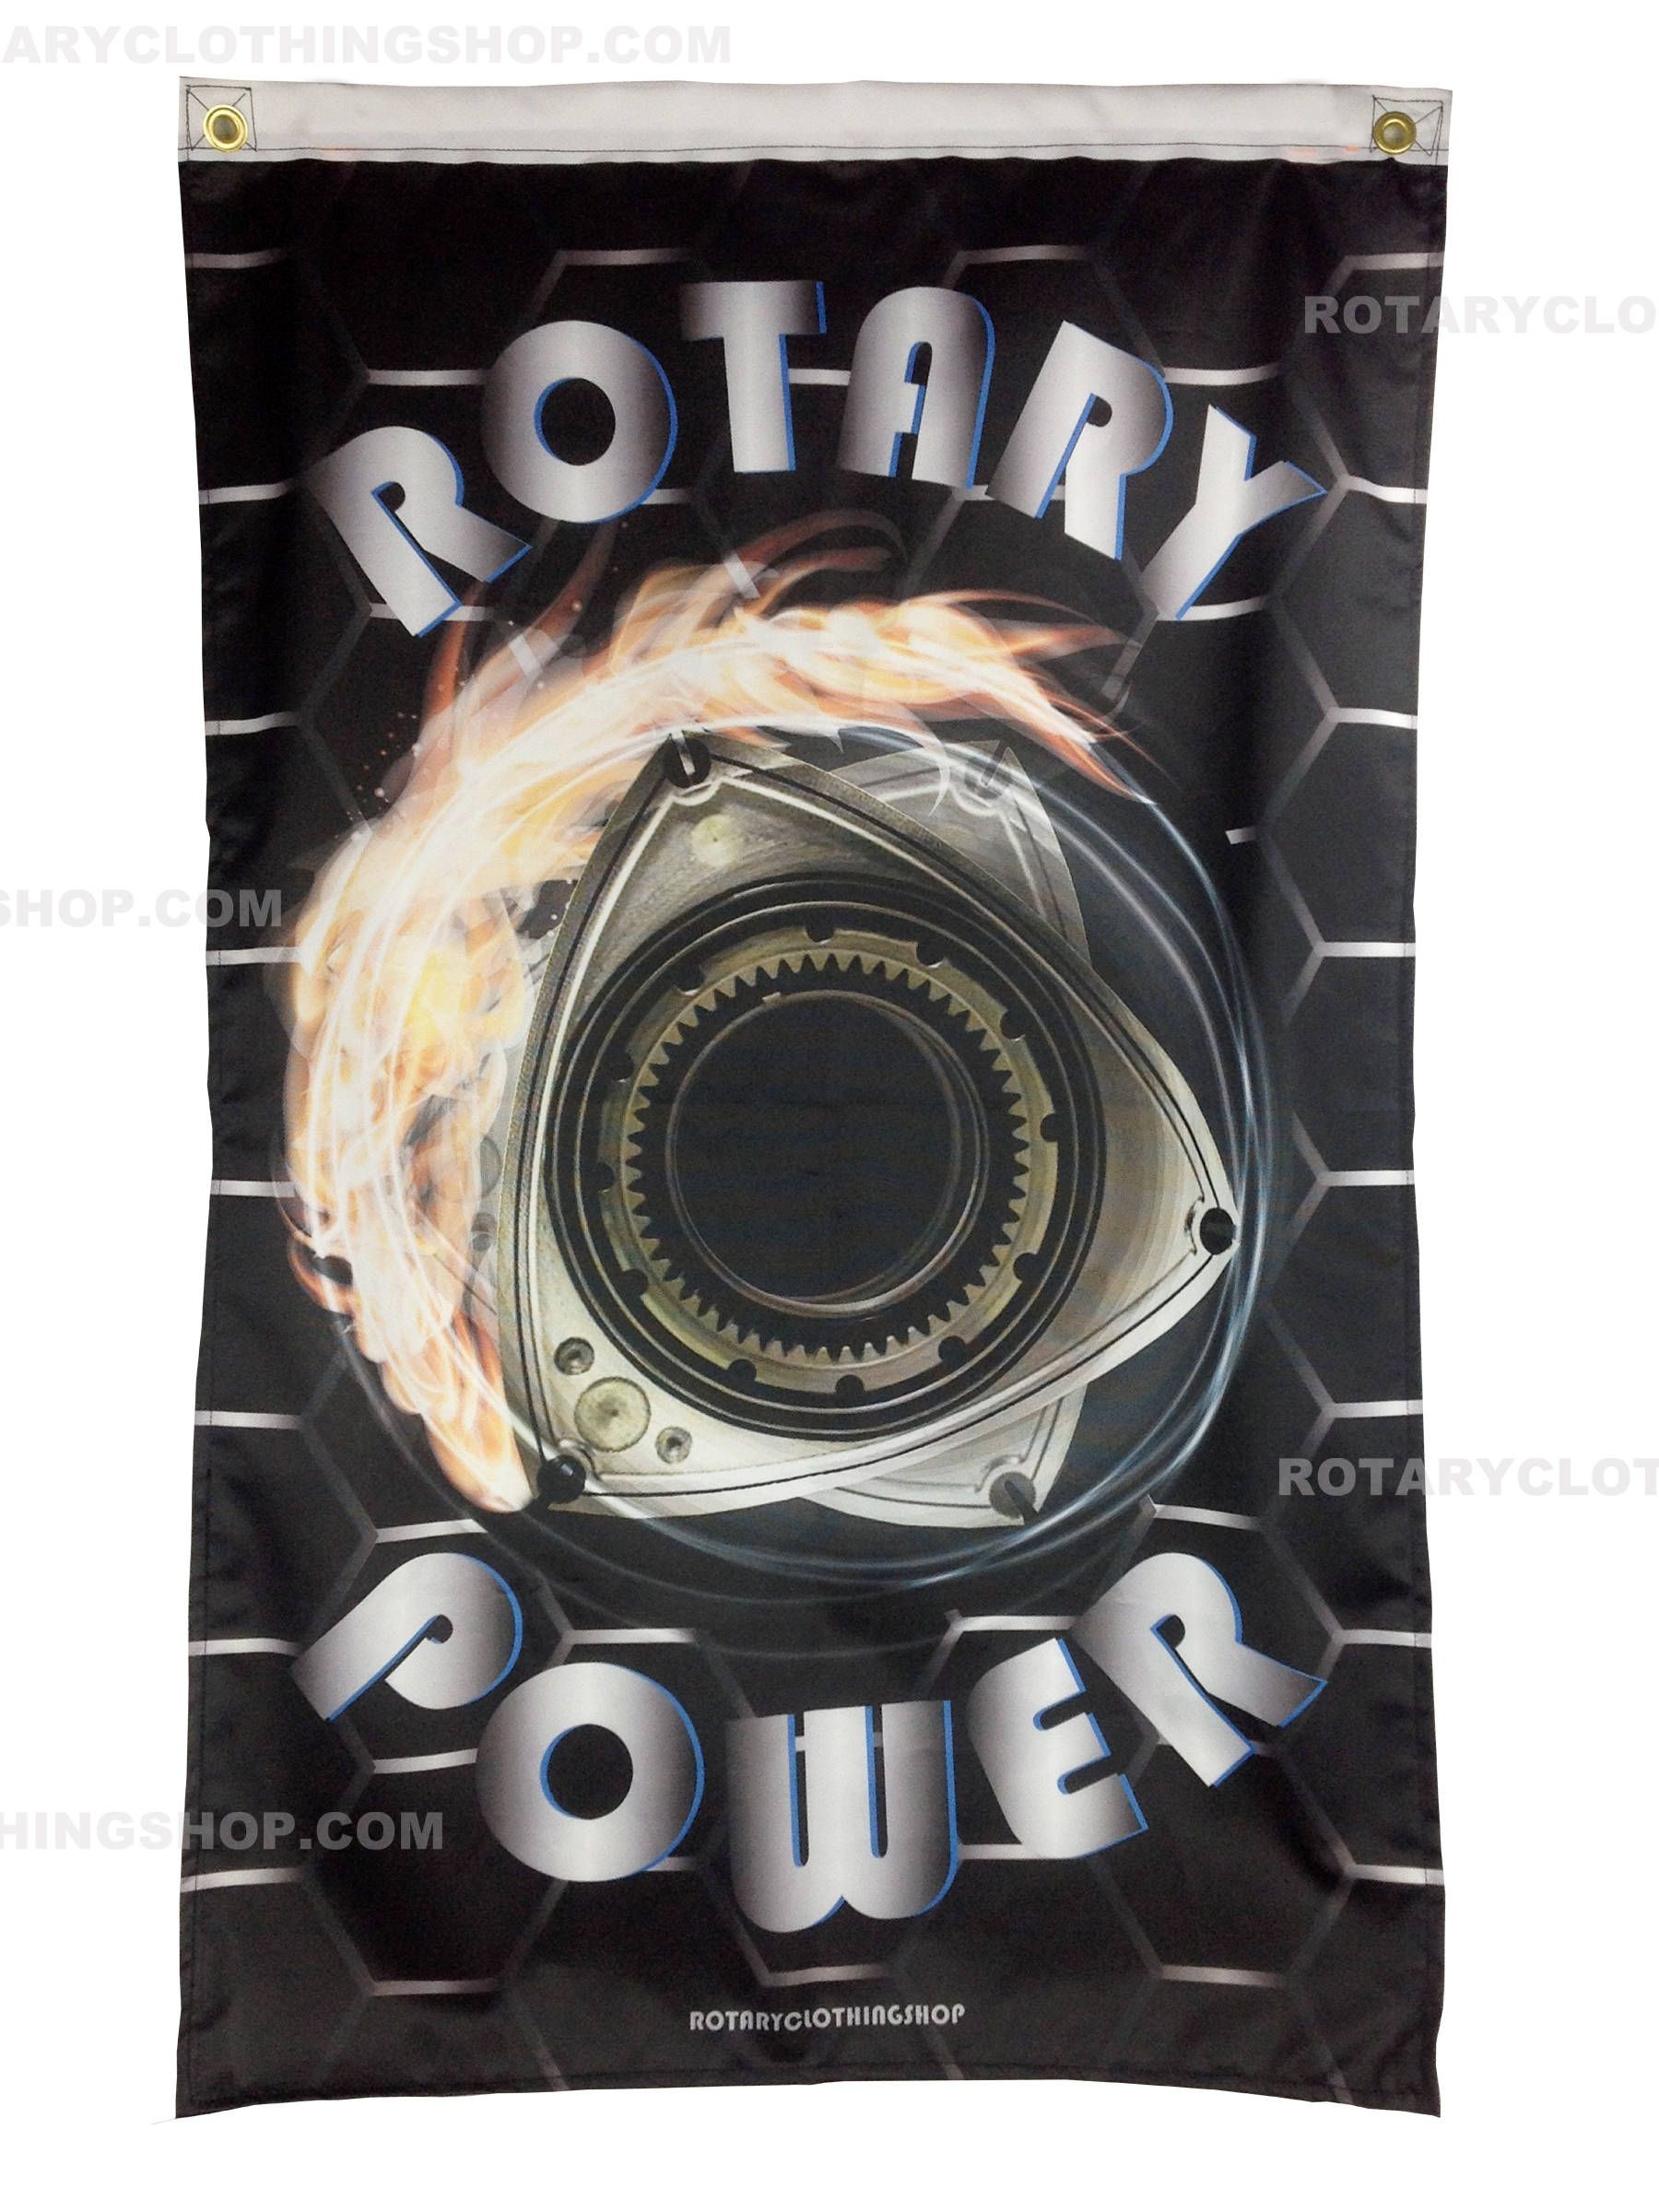 Wankel Rotary Engine Diagram Rotary Power Flag Wankel Banner Rotary Engine Limited Edition Of Wankel Rotary Engine Diagram